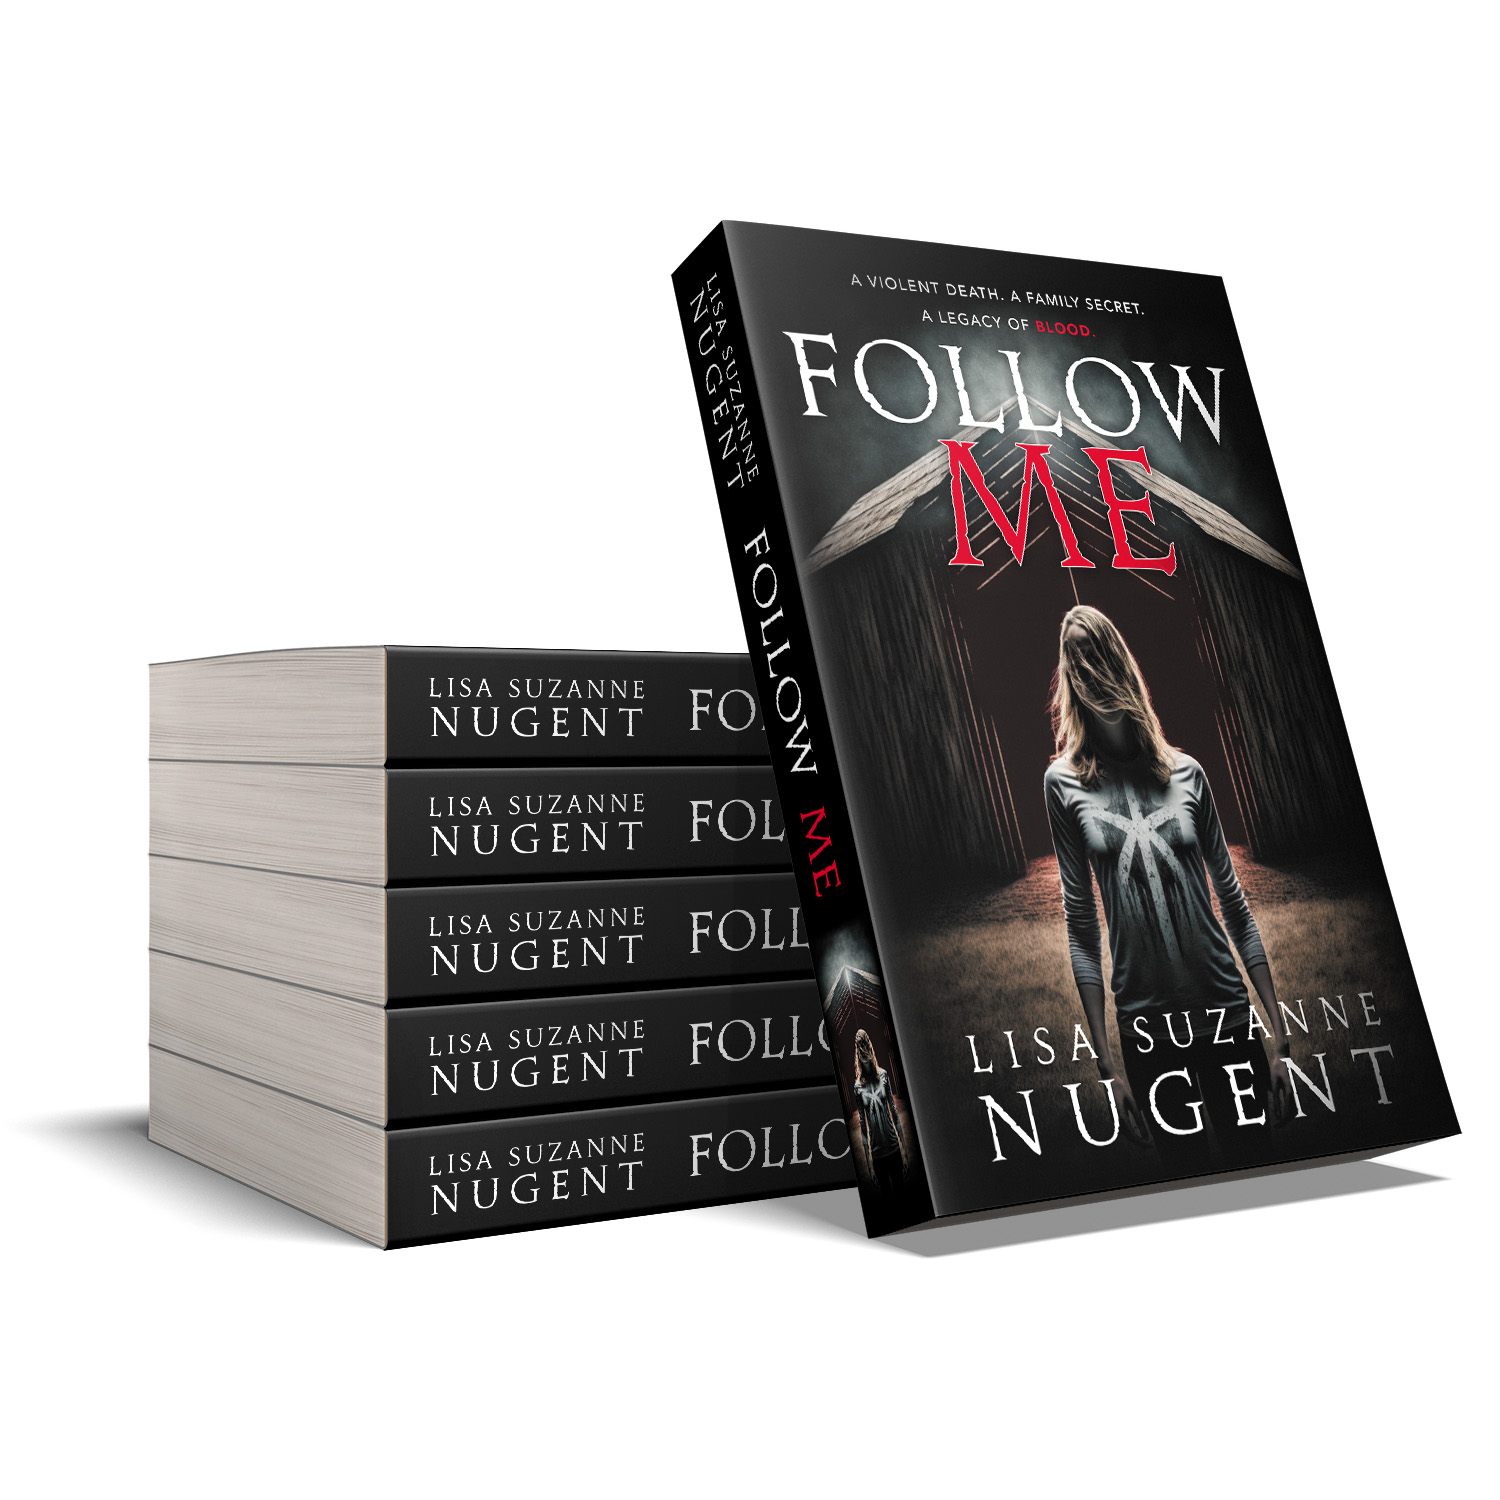 'Follow Me' is a skin-chilling modern horror novel. The author is Lisa Suzanne Nugent. The book cover and interior design are by Mark Thomas. To learn more about what Mark could do for your book, please visit coverness.com.